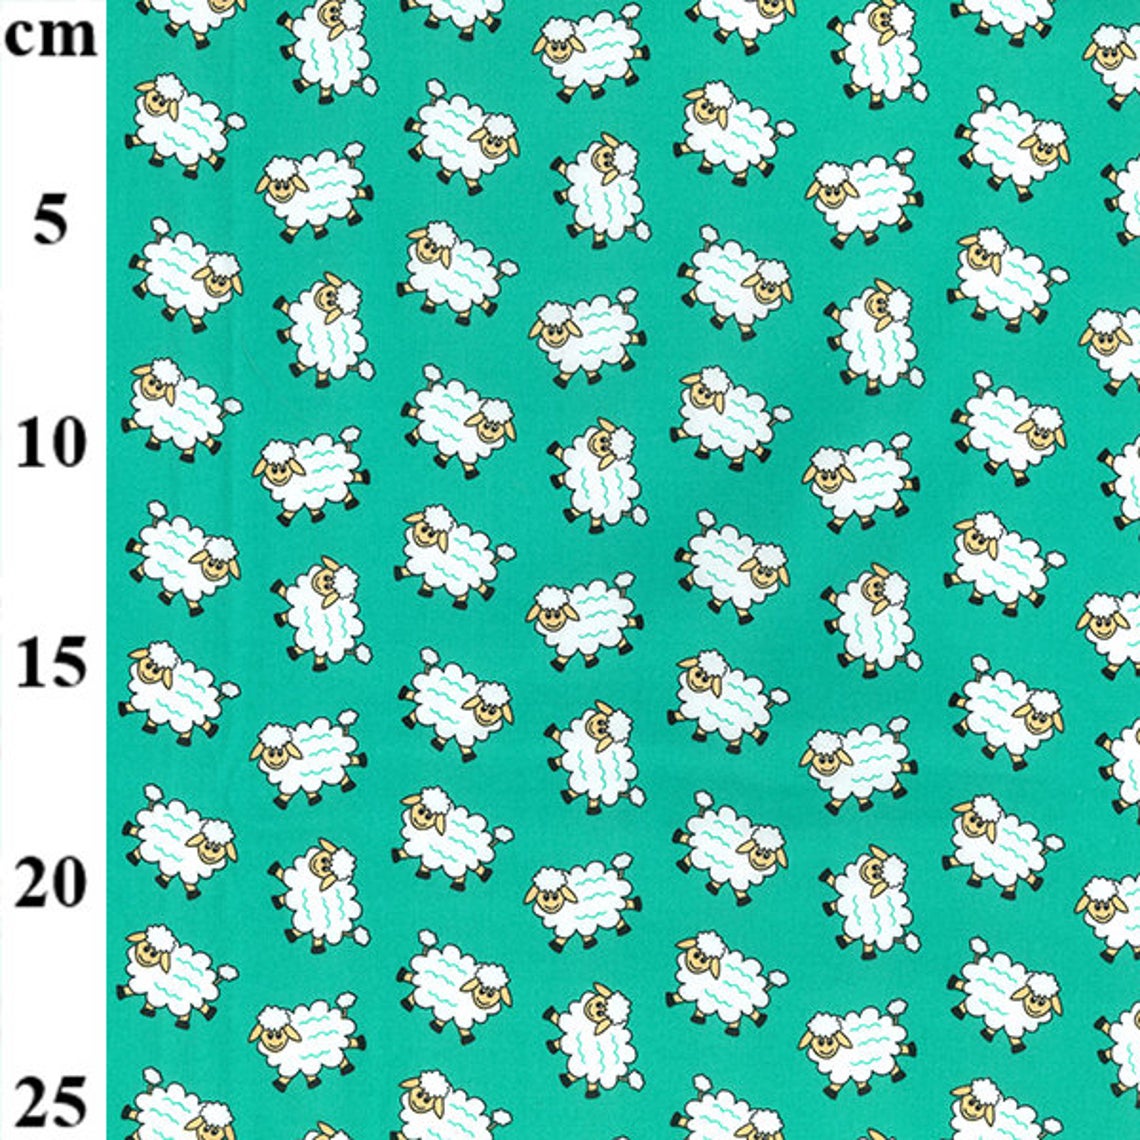 /images/product-images/2020images/FashionFabric/COTTONPOPLIN/Pop2021Aug/sheep-green.jpg